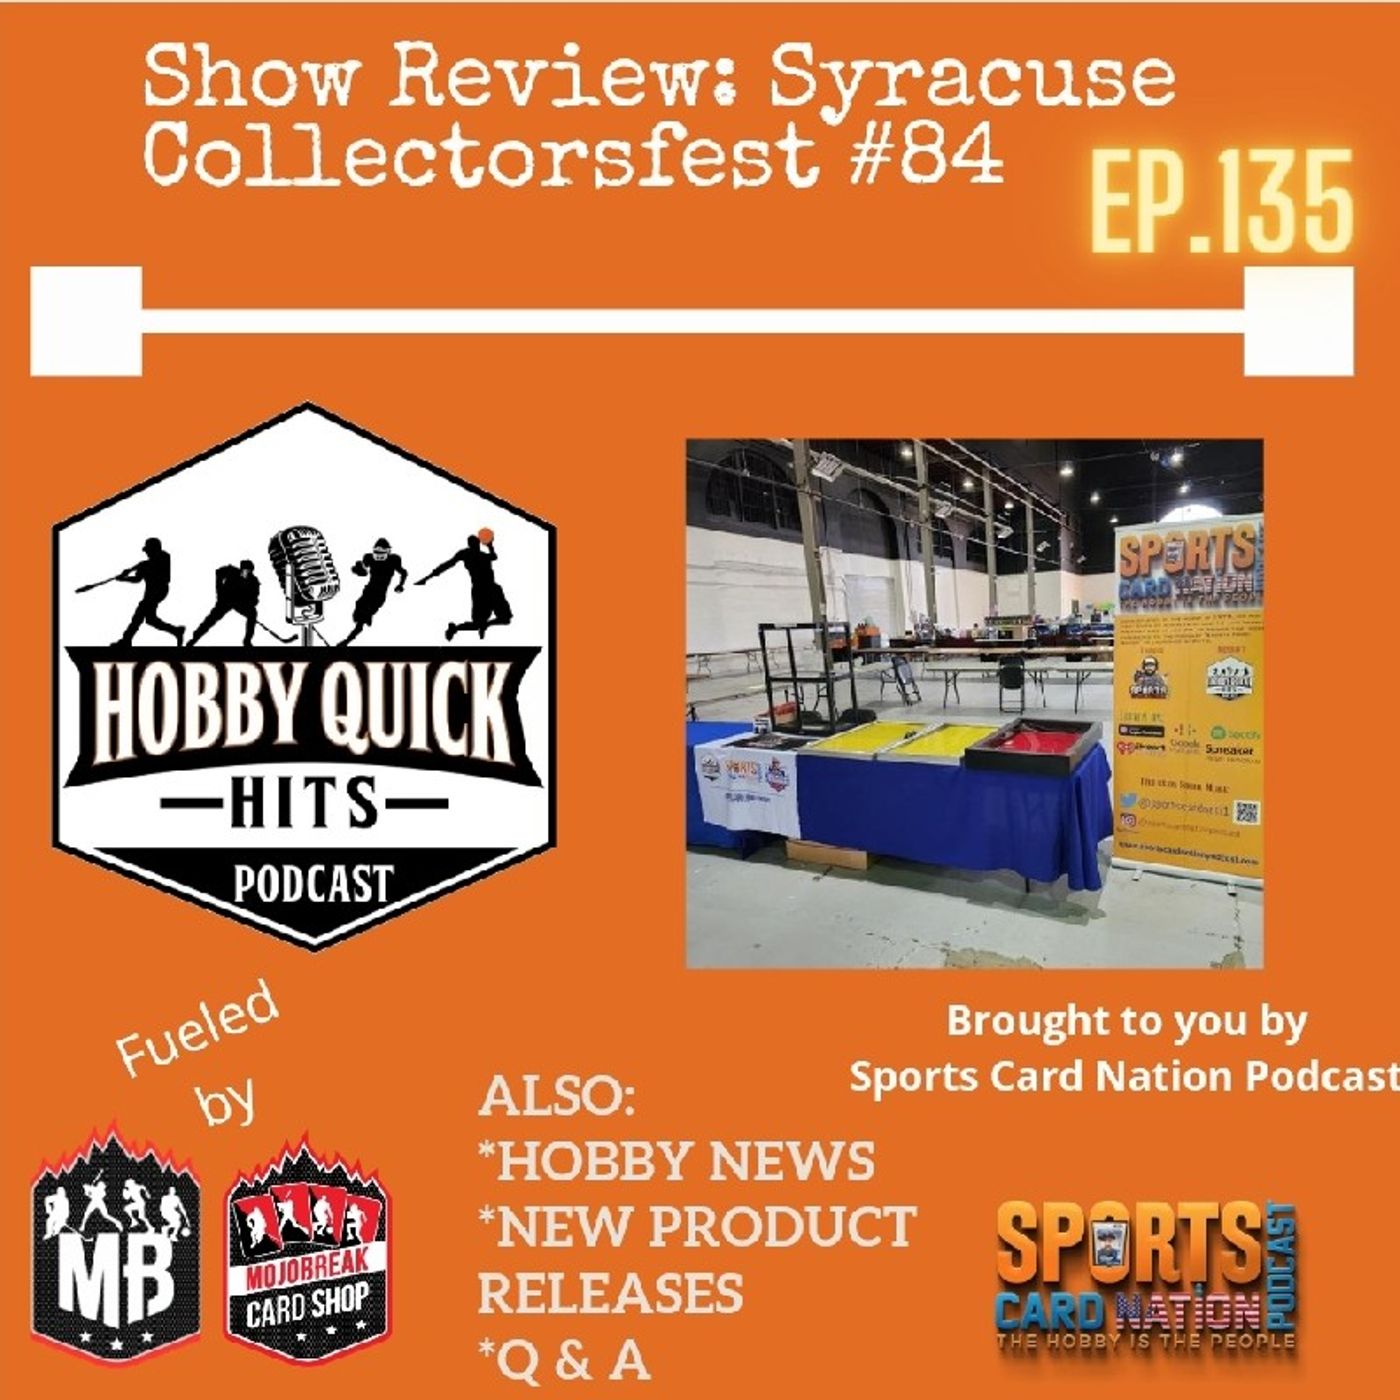 Hobby Quick Hits Ep.135 CollectorsFest Show Review